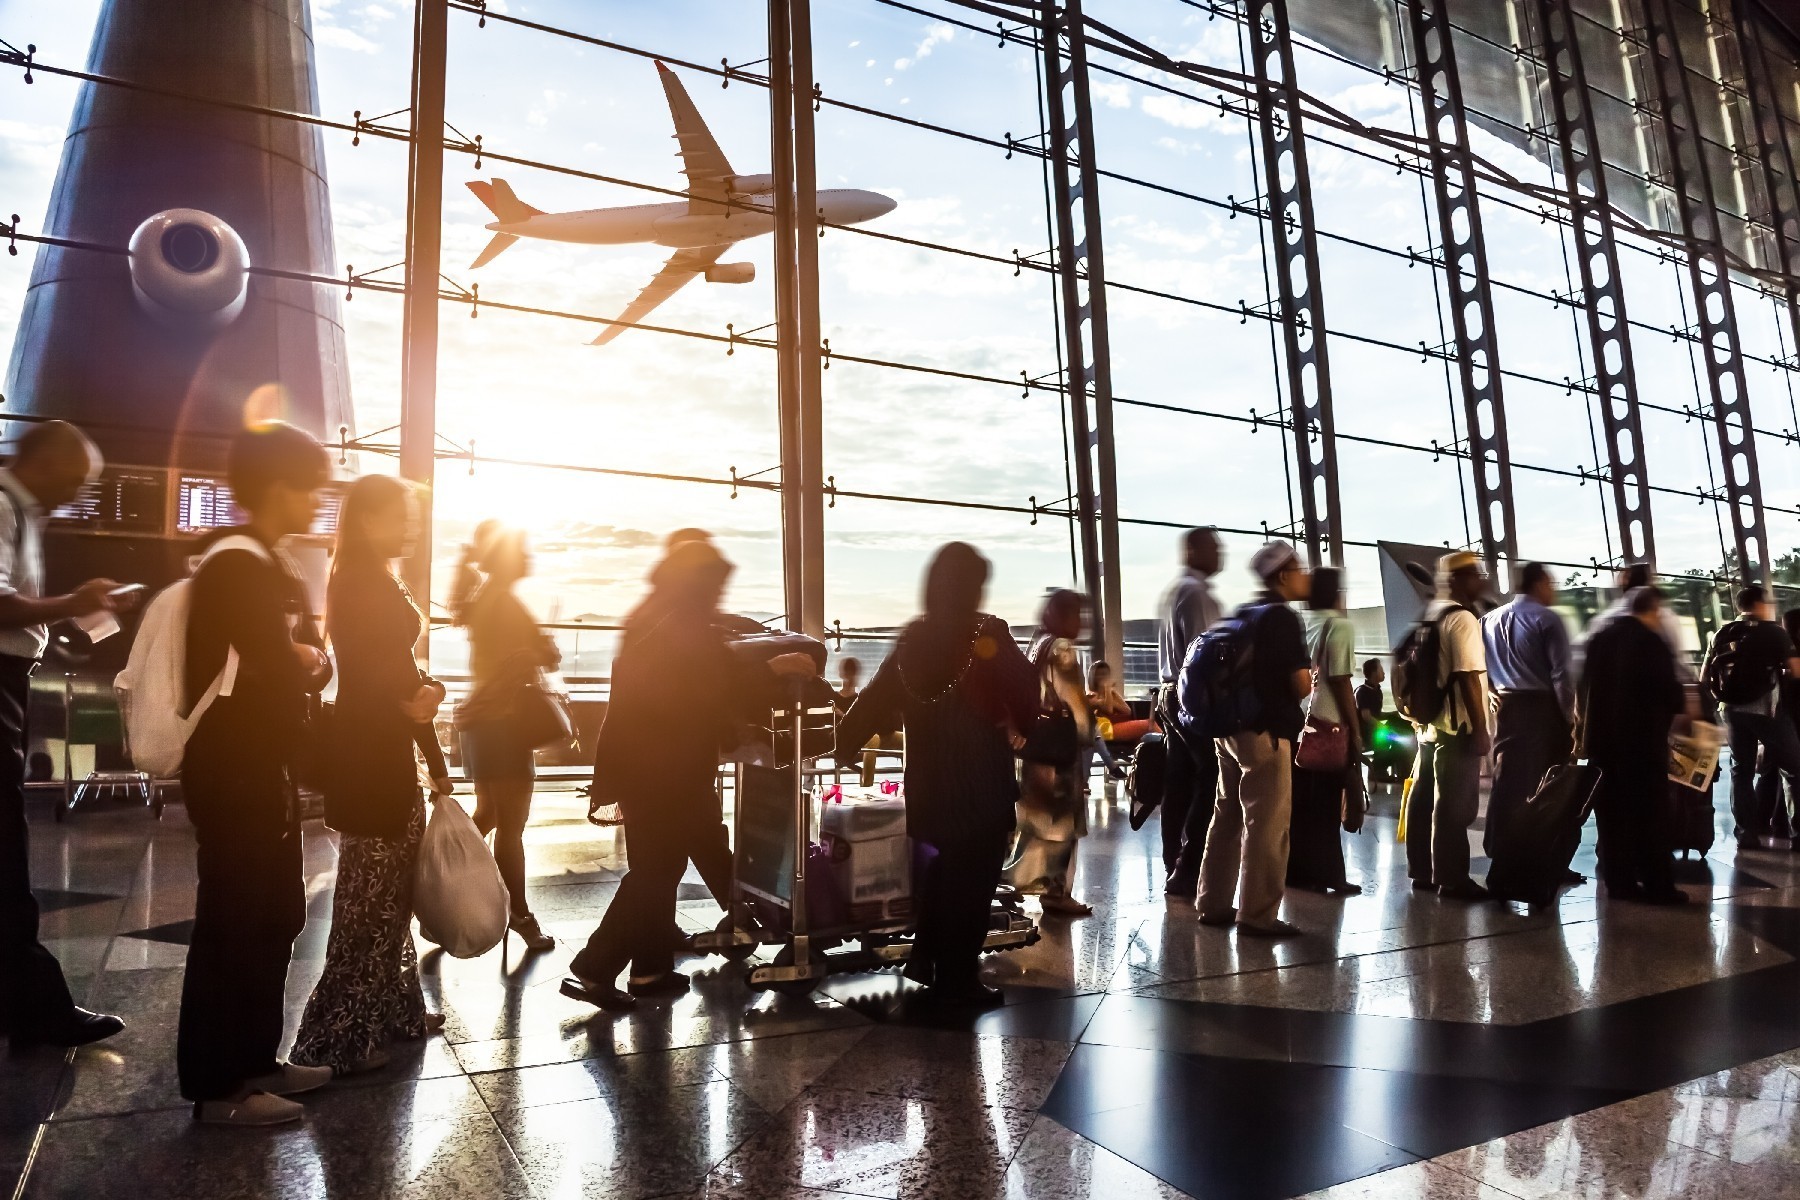 <p>Nobody likes to get bumped from a flight, but you should know that <a href="https://www.huffingtonpost.com/kelly-payne/11-airline-secrets-from-a_b_9618914.html" rel="noreferrer noopener">your flight is likely overbooked</a>. It has to be. Airplanes need to be full or close to it for the airline to make money. And to compensate for the people who miss flights because they’ve slept in, missed their connections, or been delayed for some other reason, flights are routinely overbooked. It’s a problem only if everybody shows up.</p>